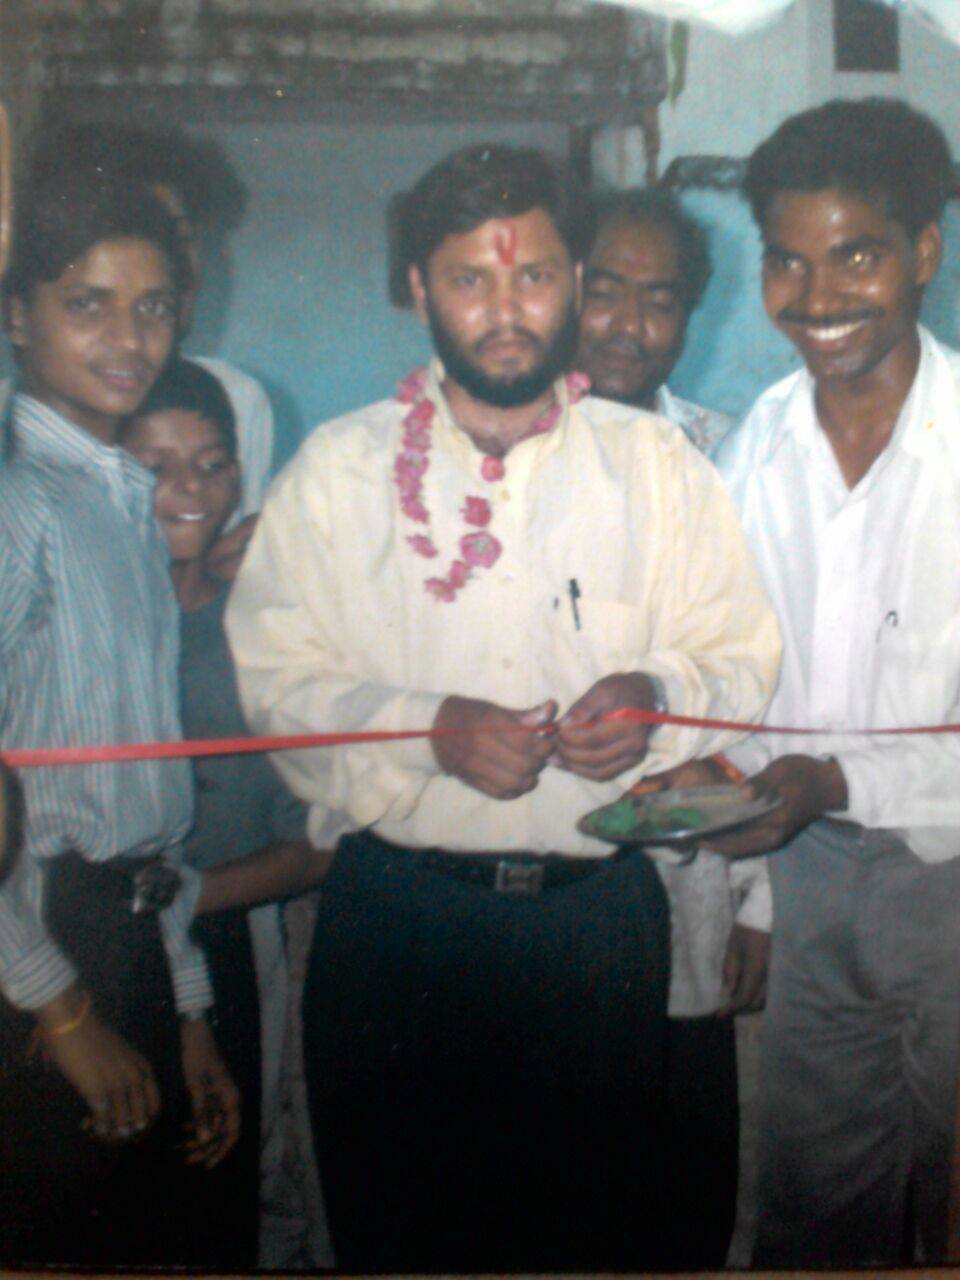 The 16 years old Dr Krishna N Sharma (on the extreme left) during the inauguration of his first business